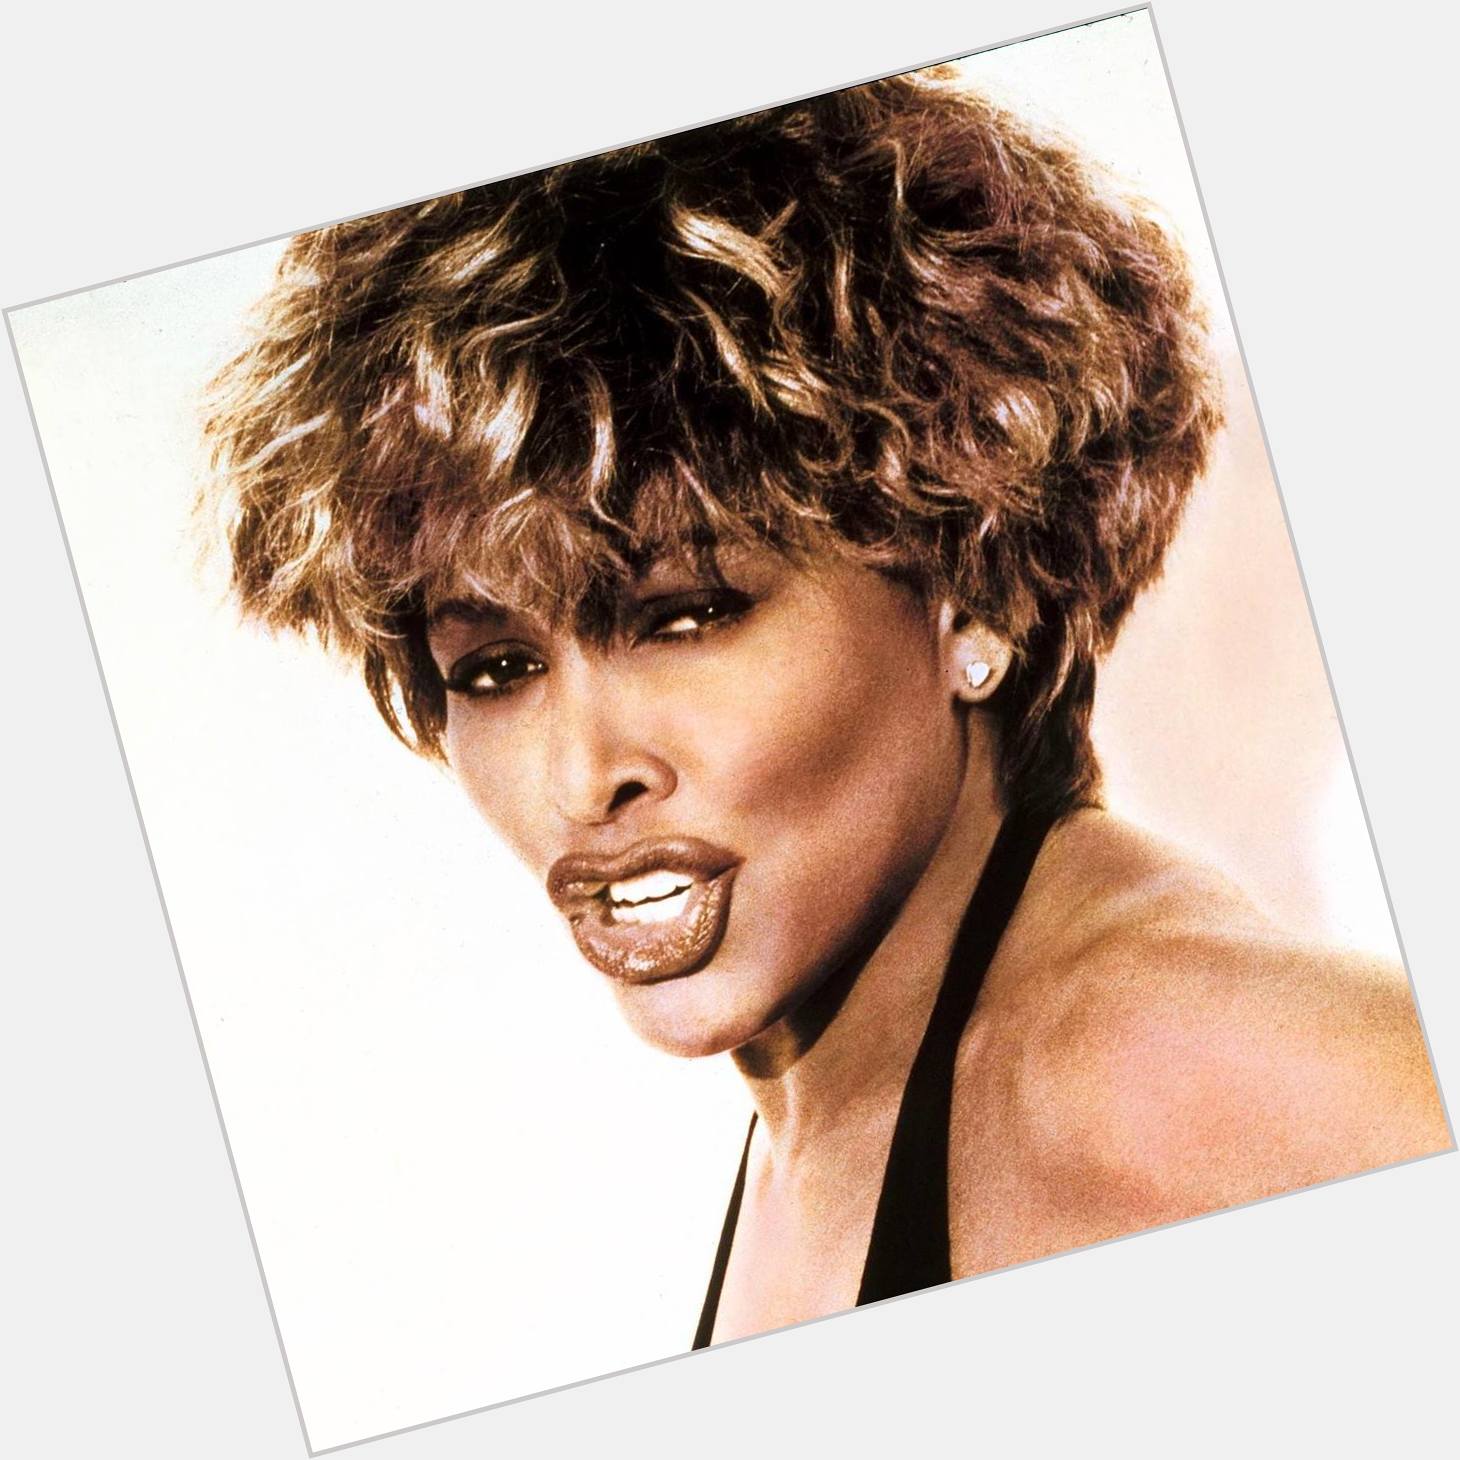 Happy 81st Birthday, Tina Turner! Our look at her \80s comeback:  